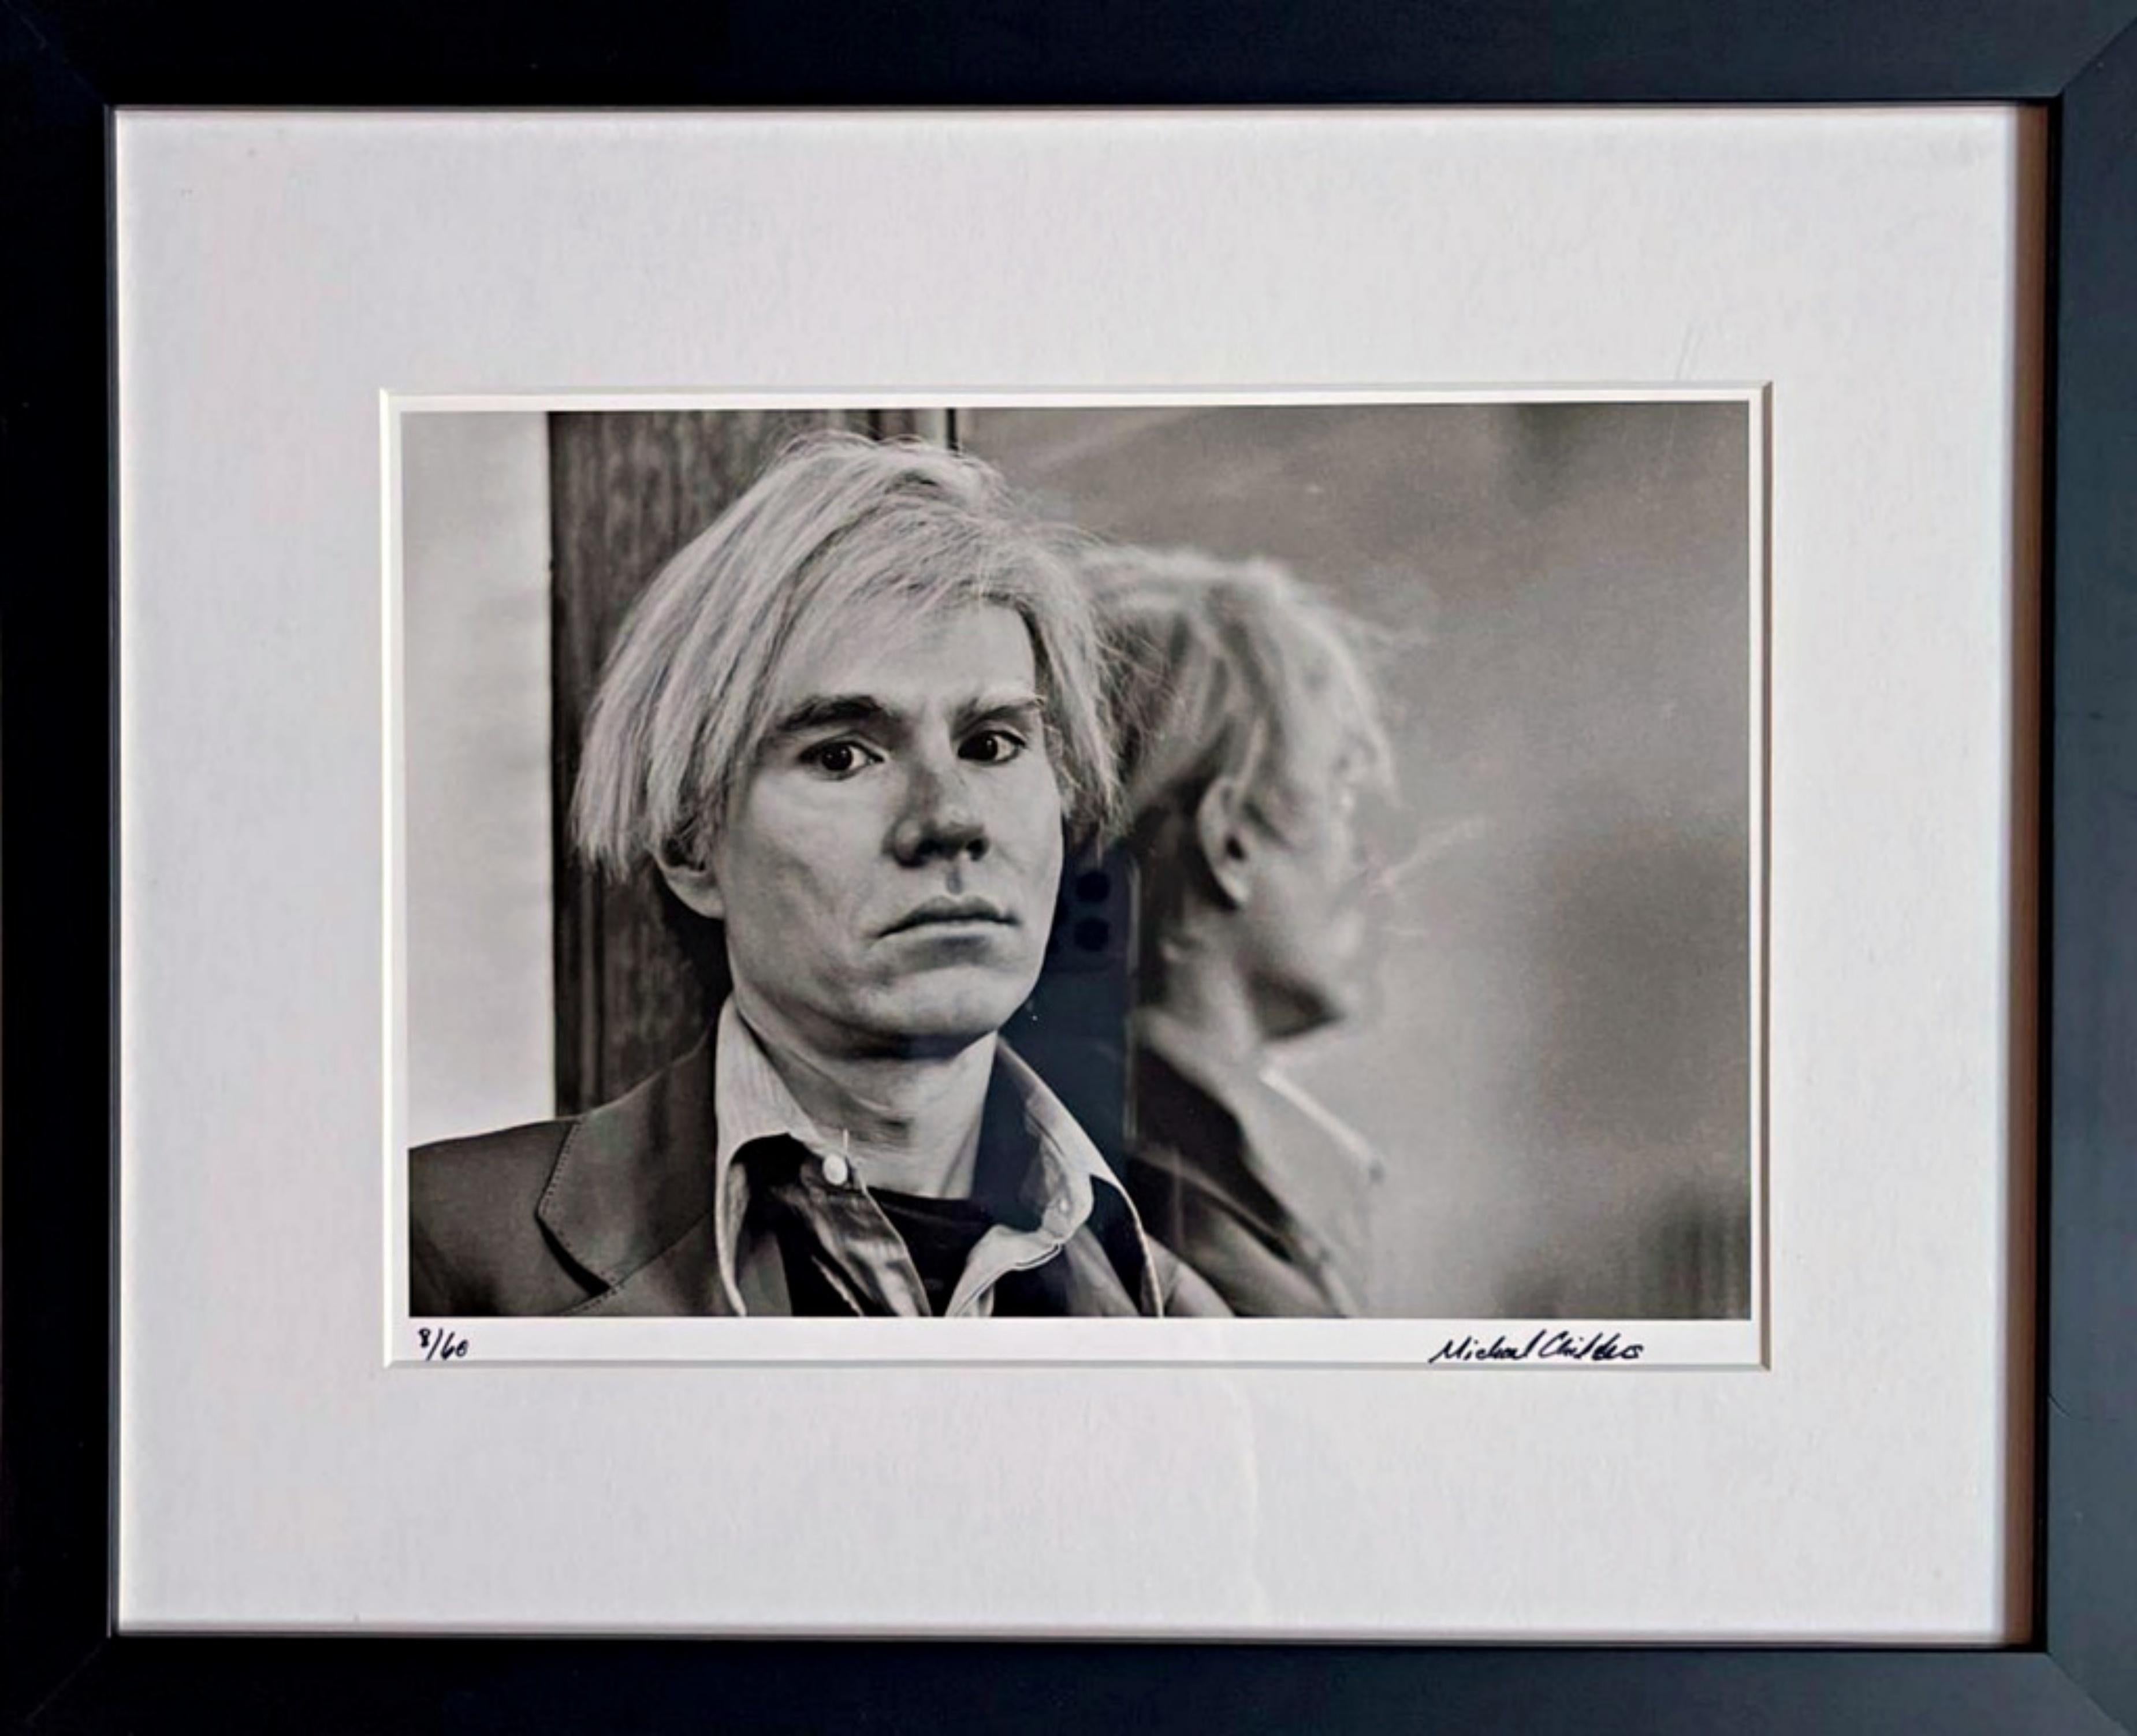 Andy Warhol in New York, 1976, 2007, hand signed photograph 8/60 for Museum